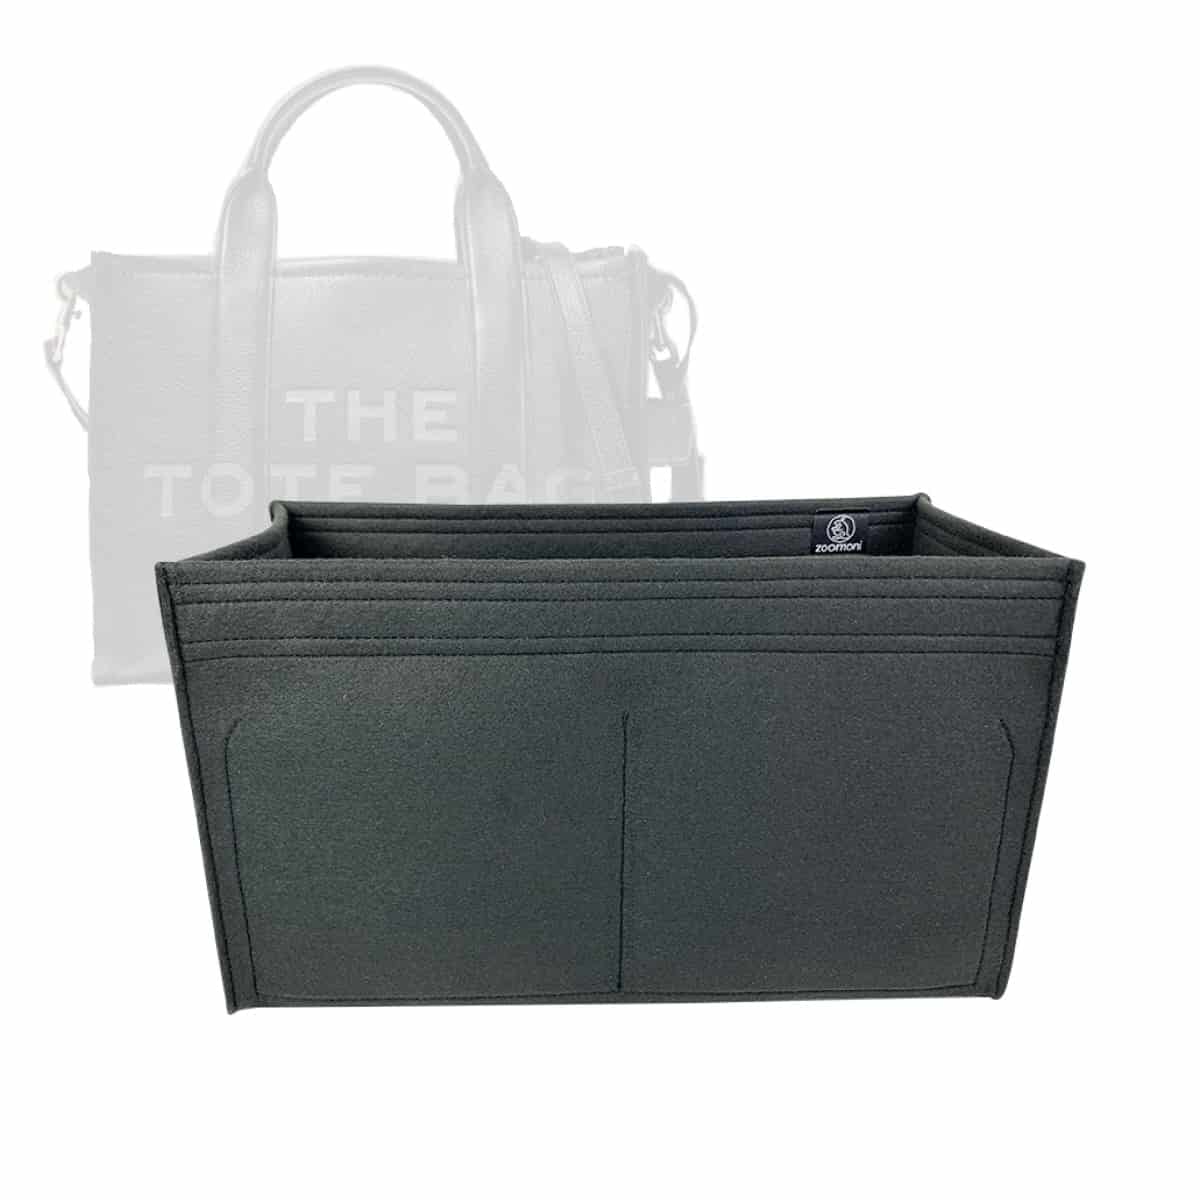 For [Marc Jacobs Large Tote Bag] Insert Organizer Liner (Style B) Black